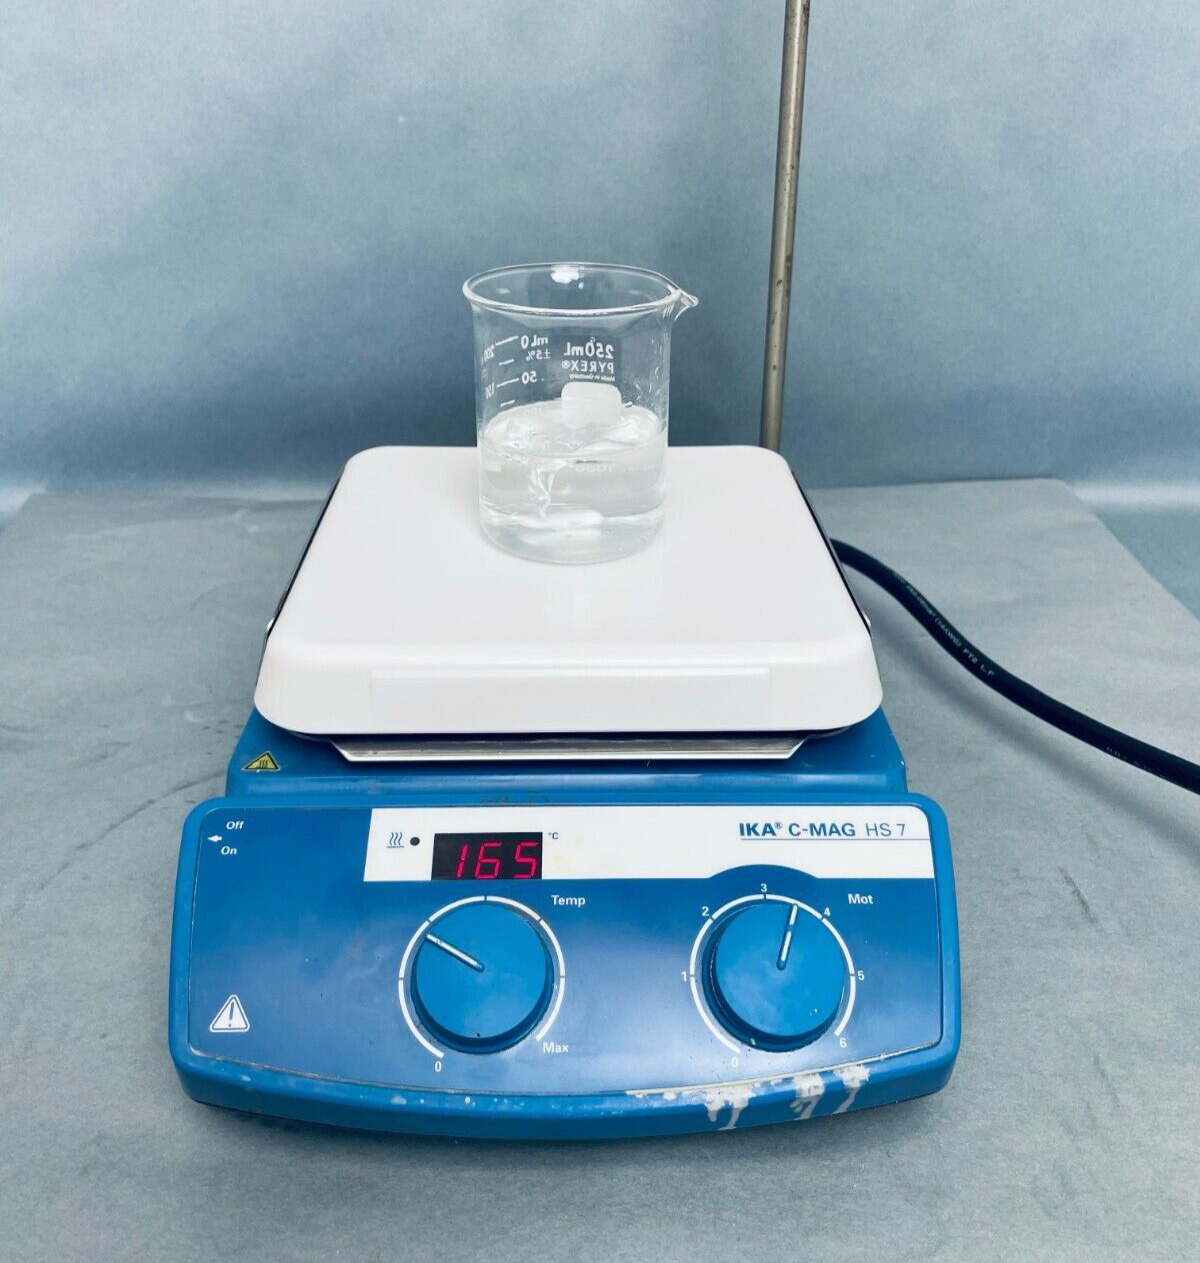 IKA C-MAG HS 7 Magnetic Stirrer and Hot Plate Ceramic Top with Warranty